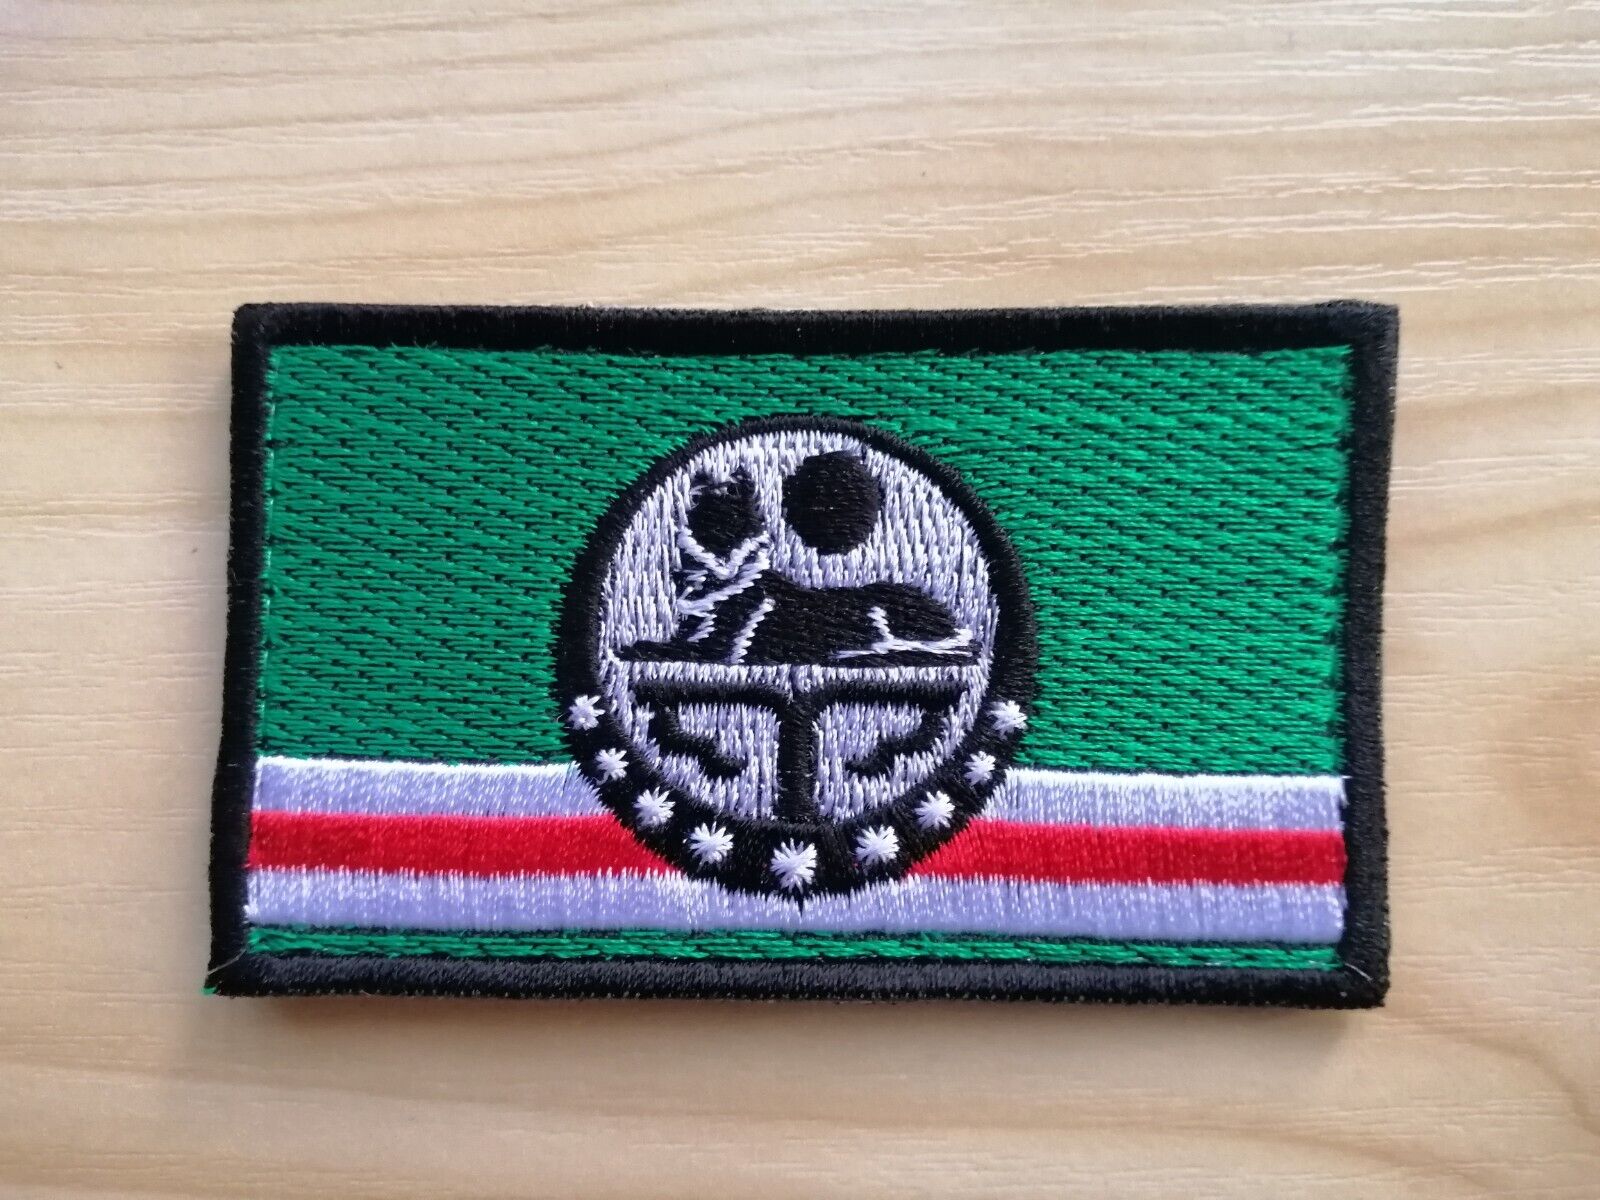 Chechen Republic of Ichkeria flagr embroidered patch UKRAINE TACTICAL PATCH